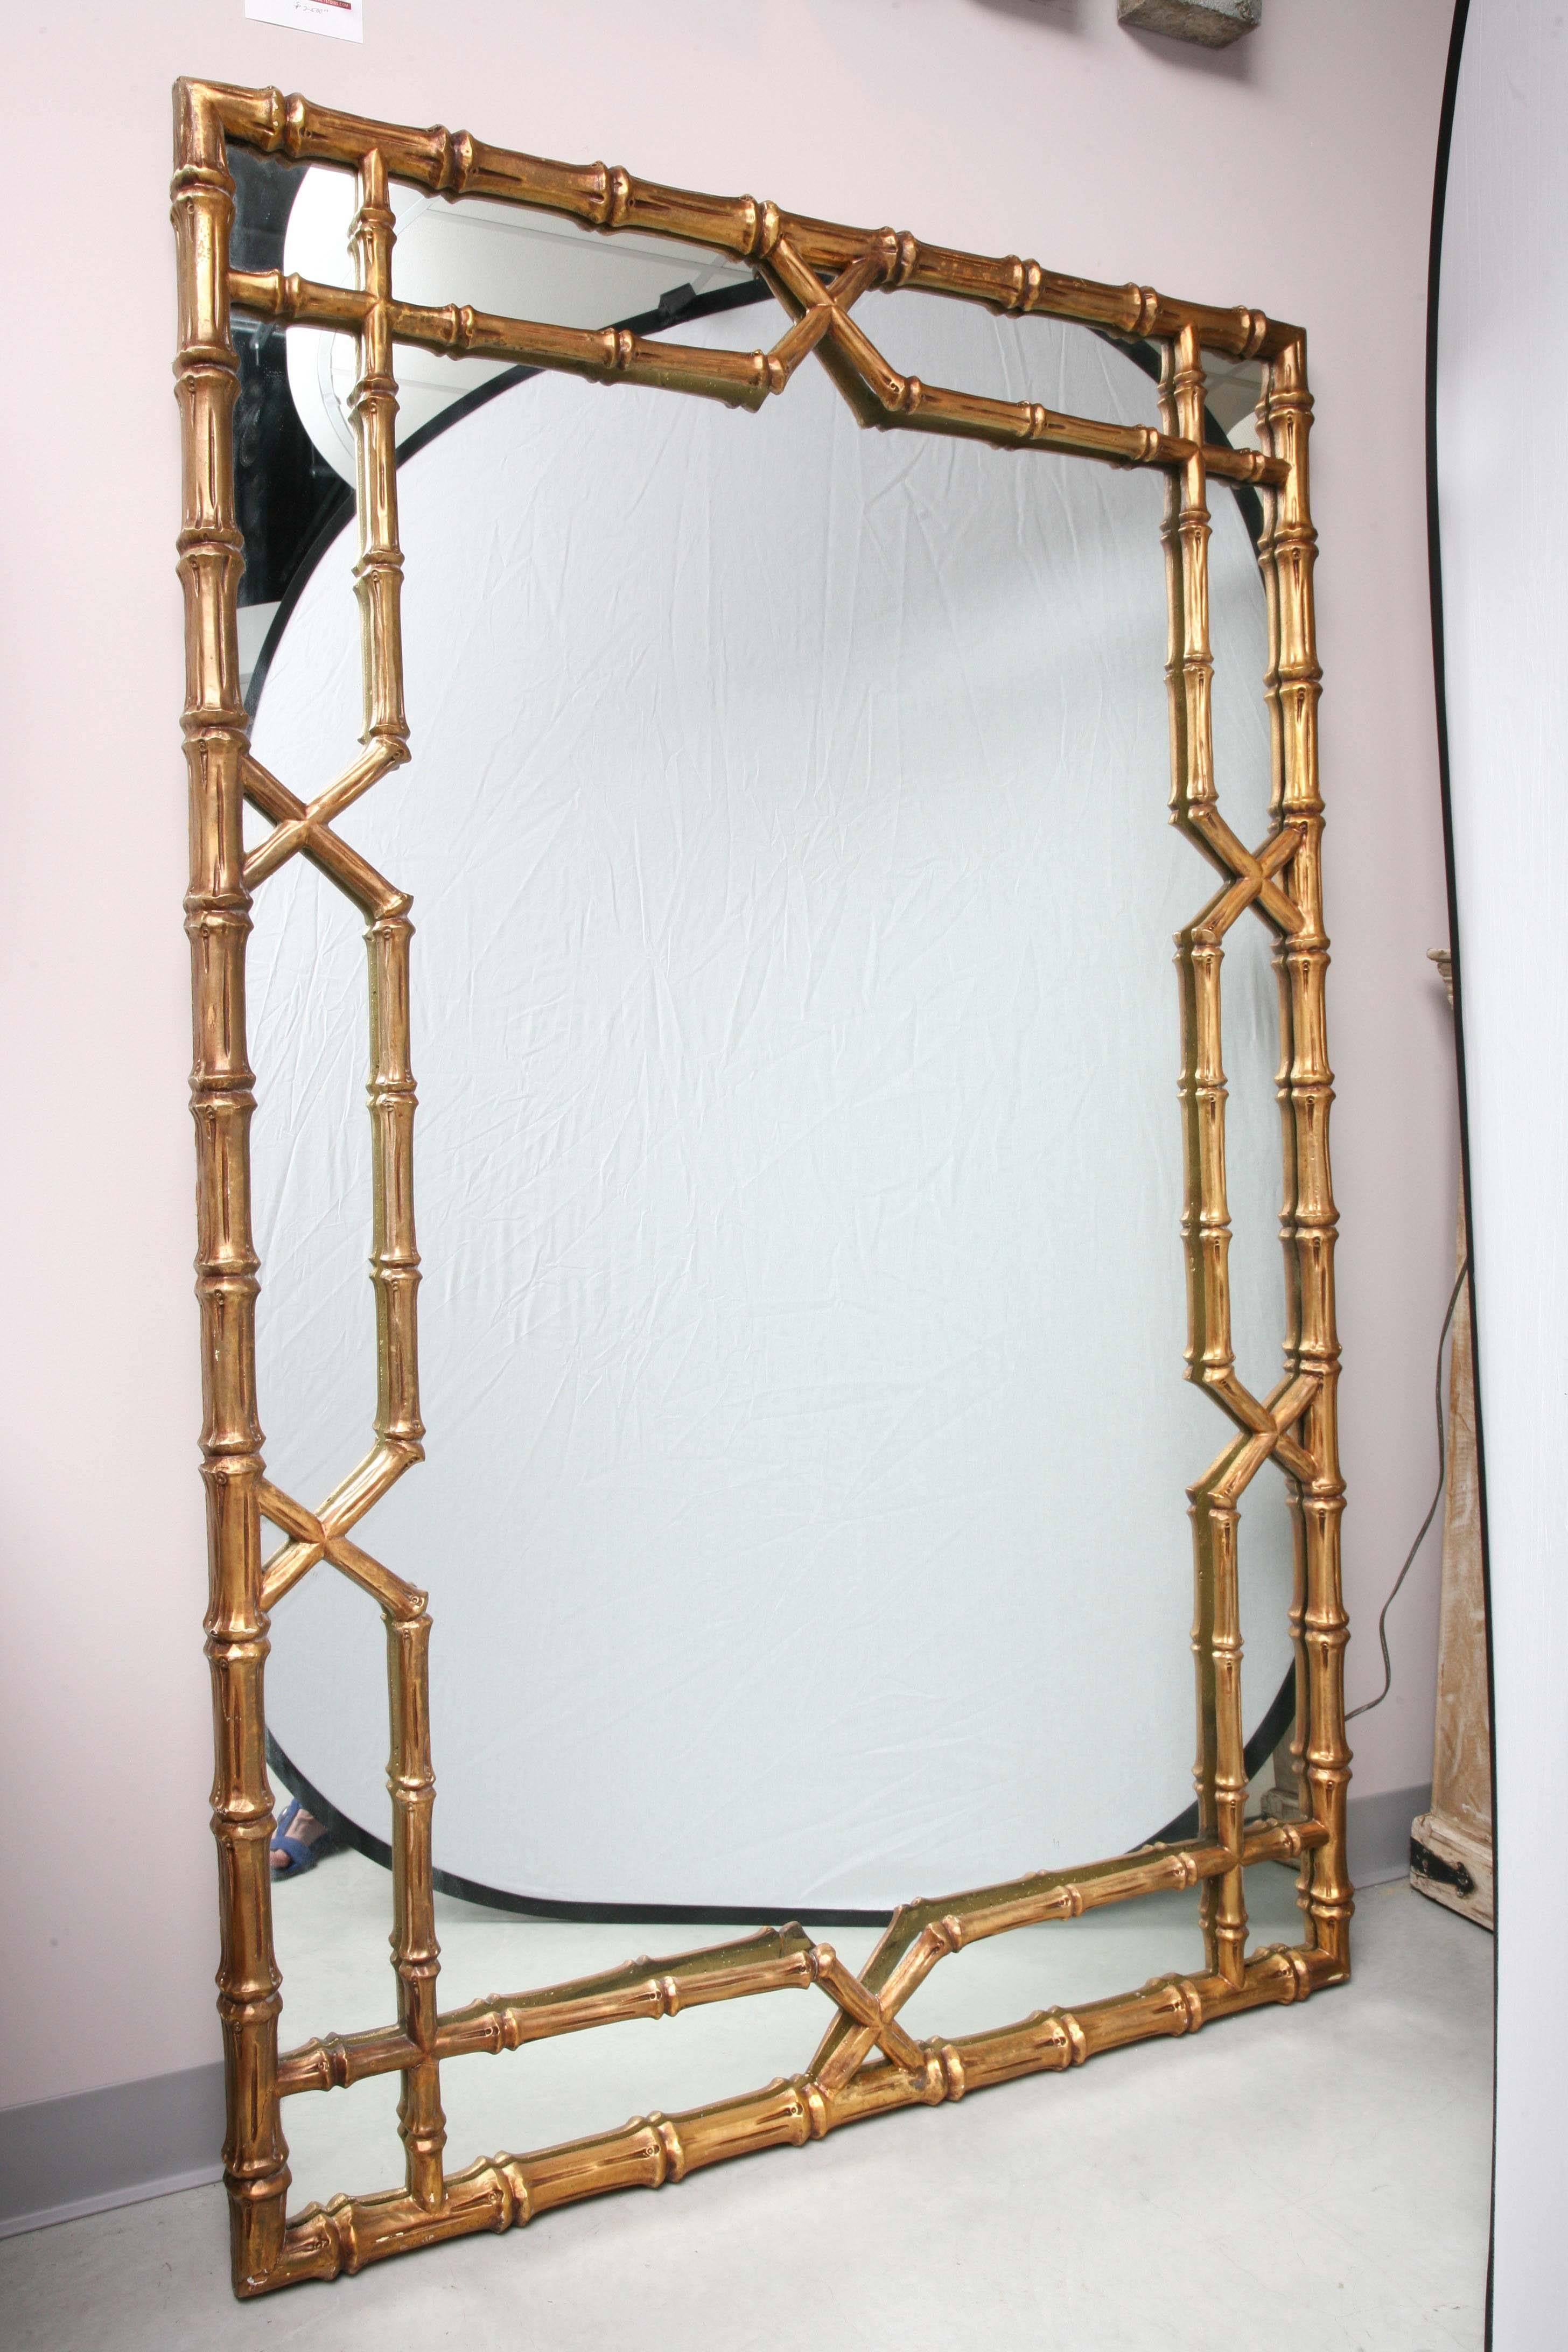 This mirror will finish a room adding casual elegance if you lean it against the wall, or a bid more formal hanging, it would also make a great headboard.